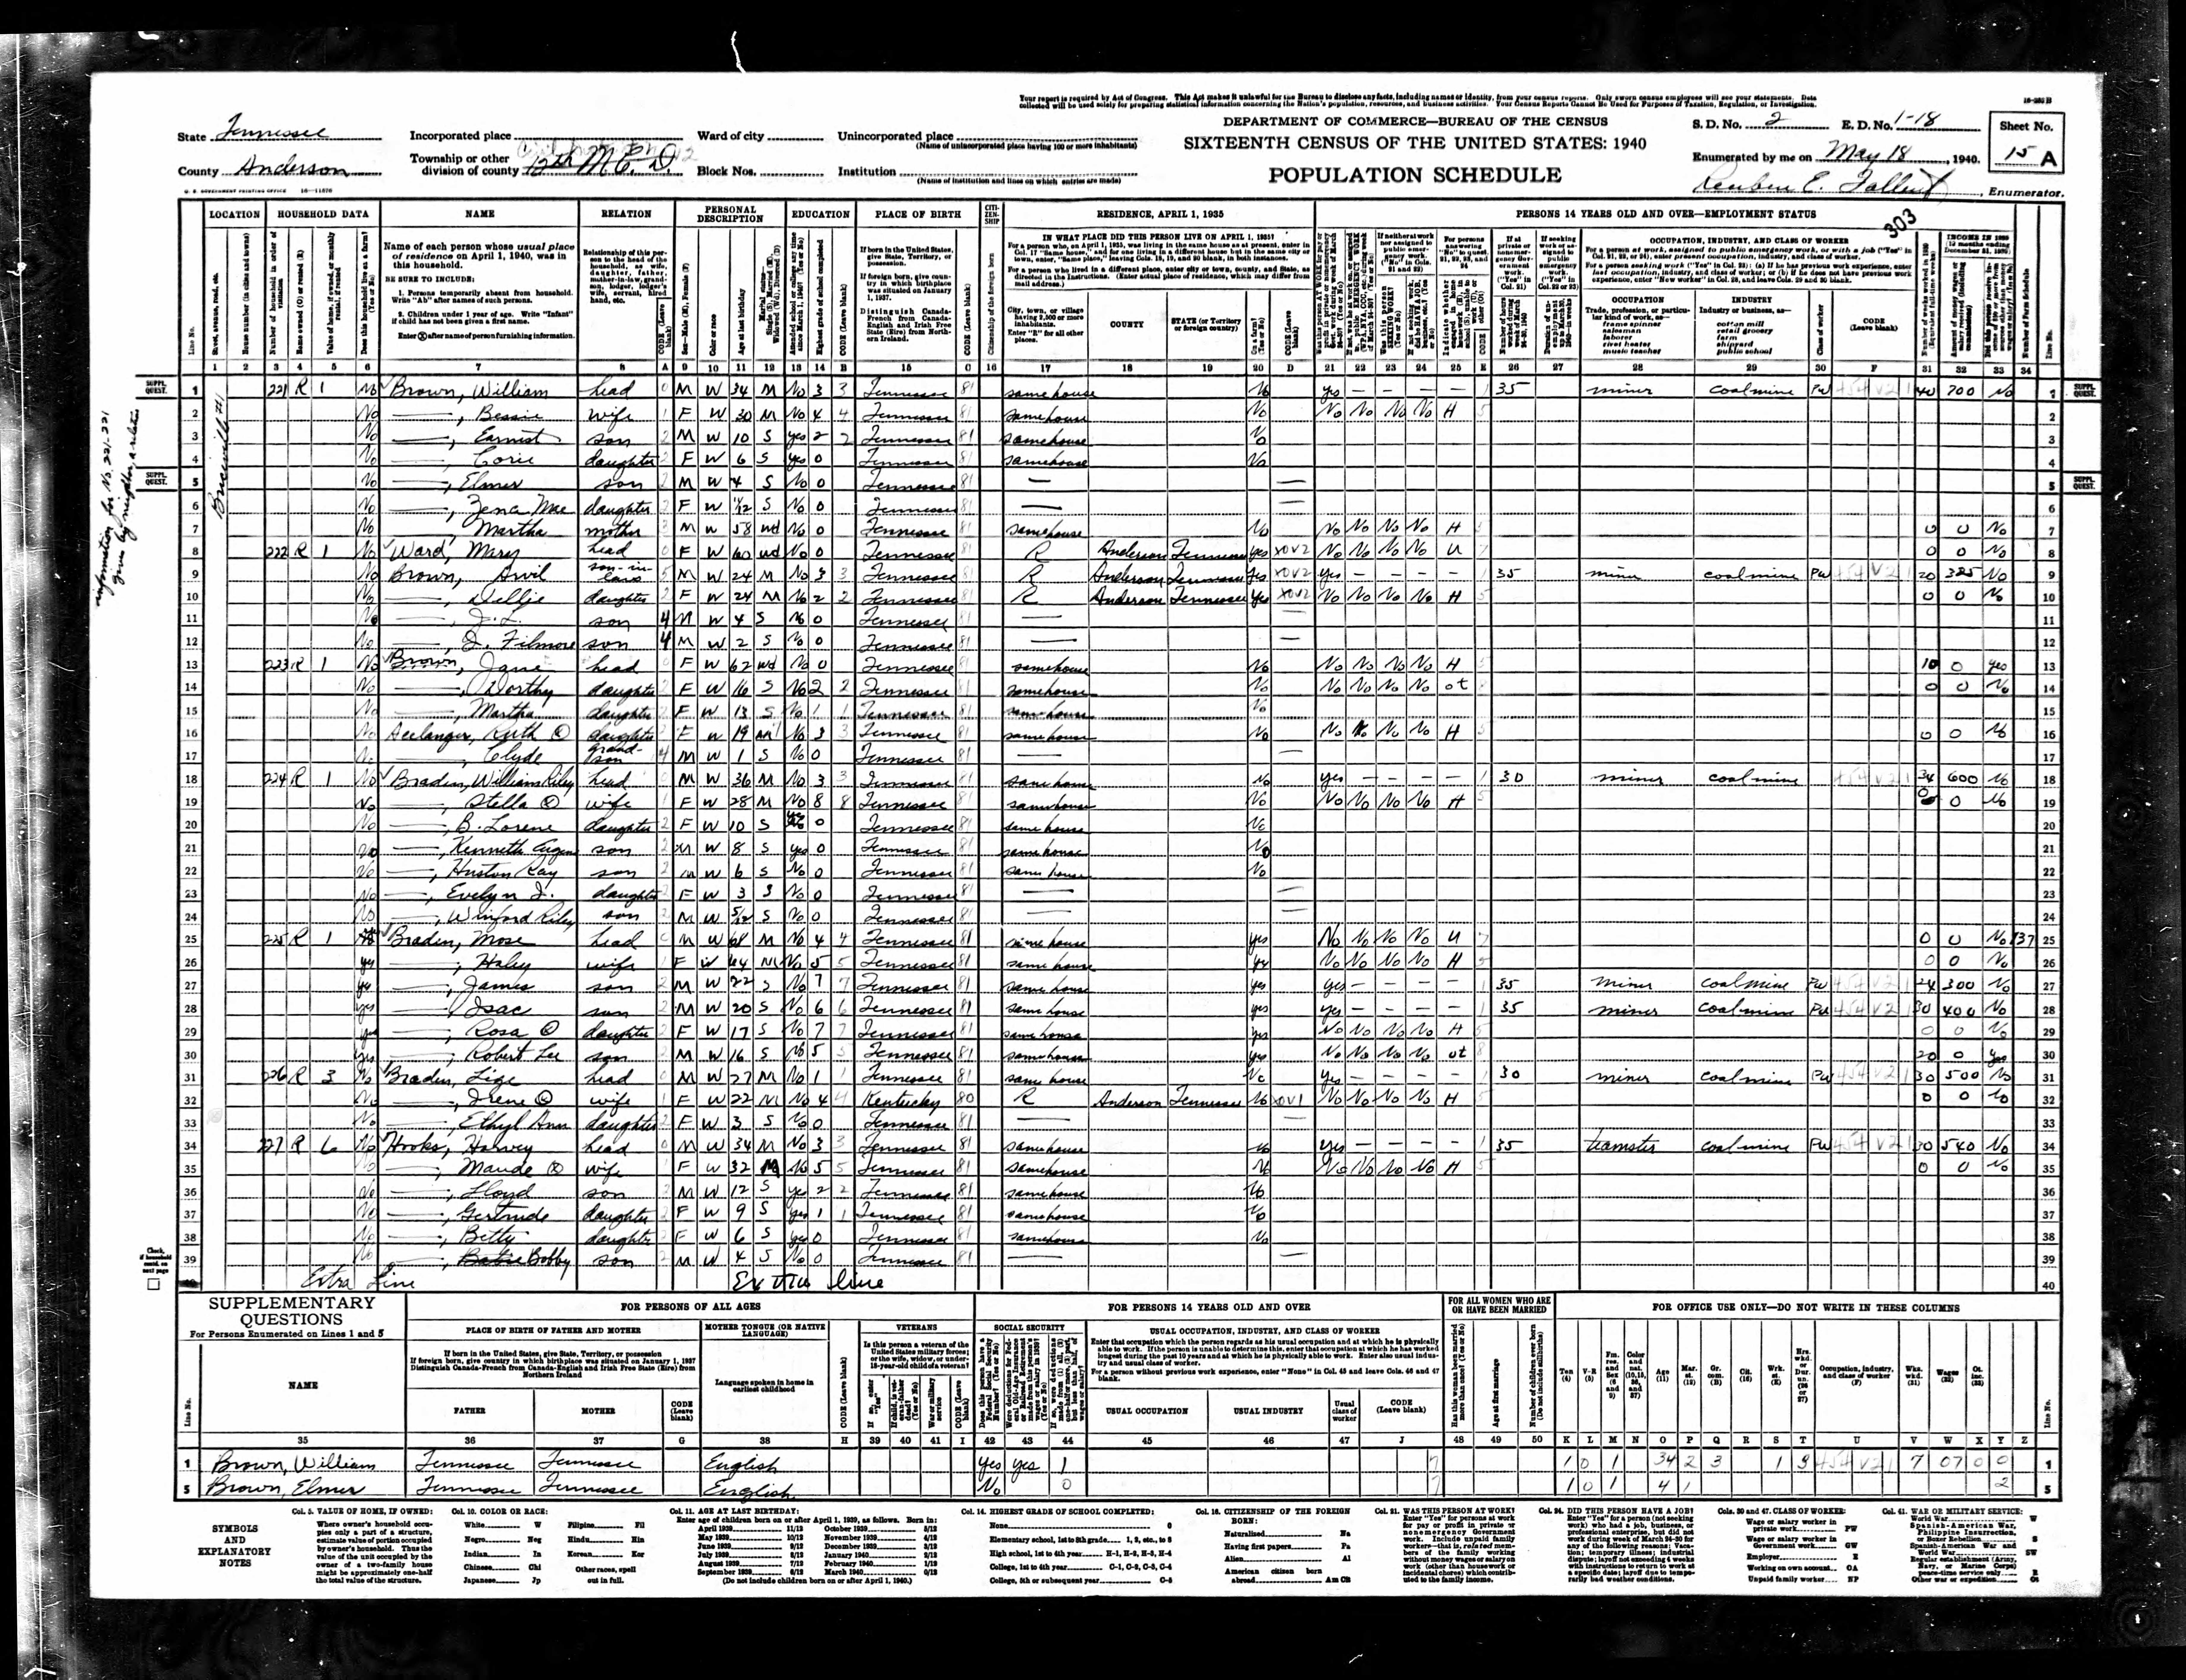 1940 U.S. Census, Anderson County, Tennessee, Dist. 12, page 303a